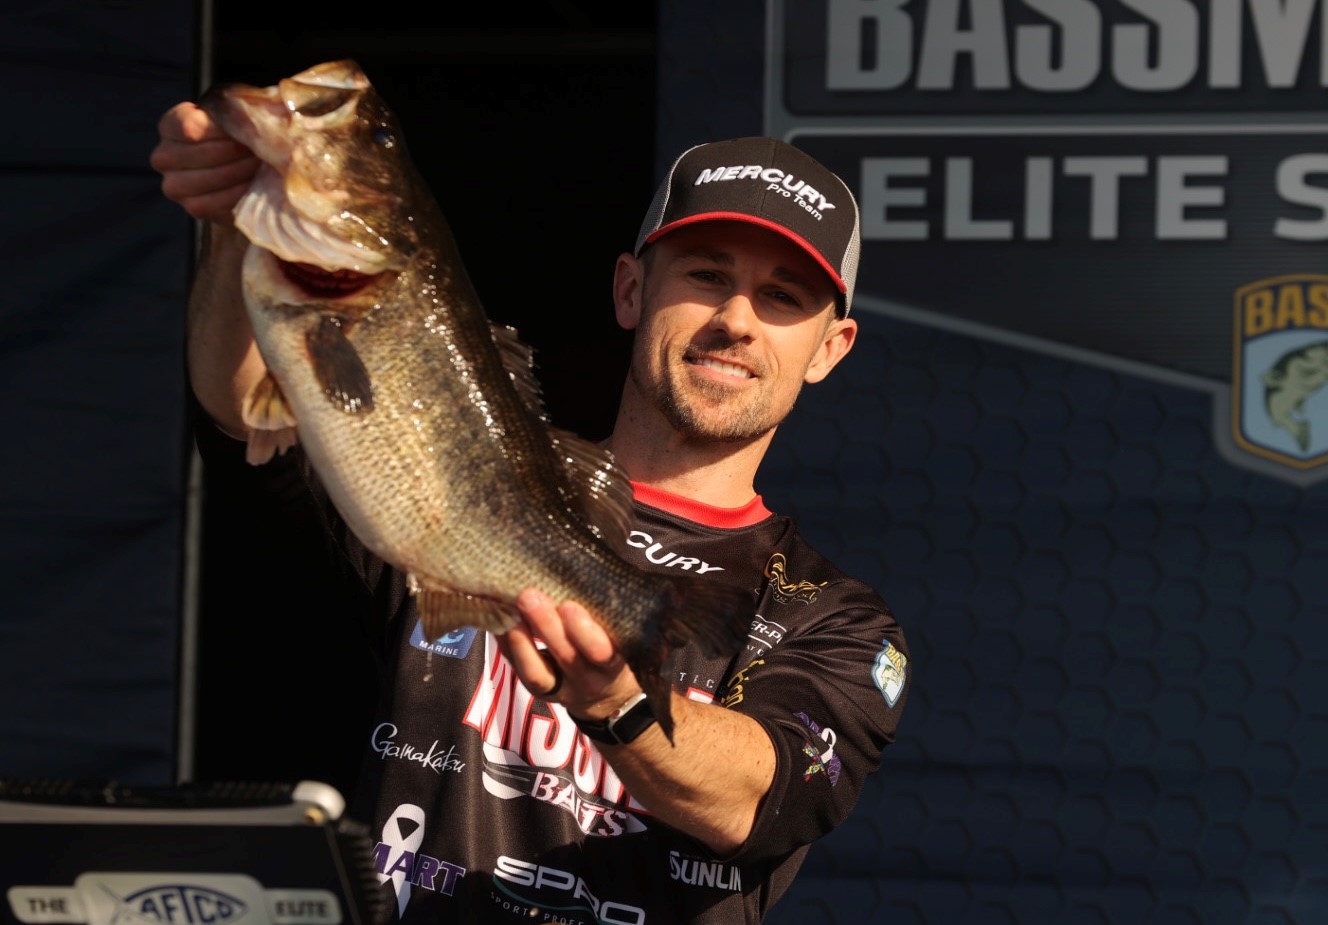 Mark Zona joins AFTCO Fishing Team